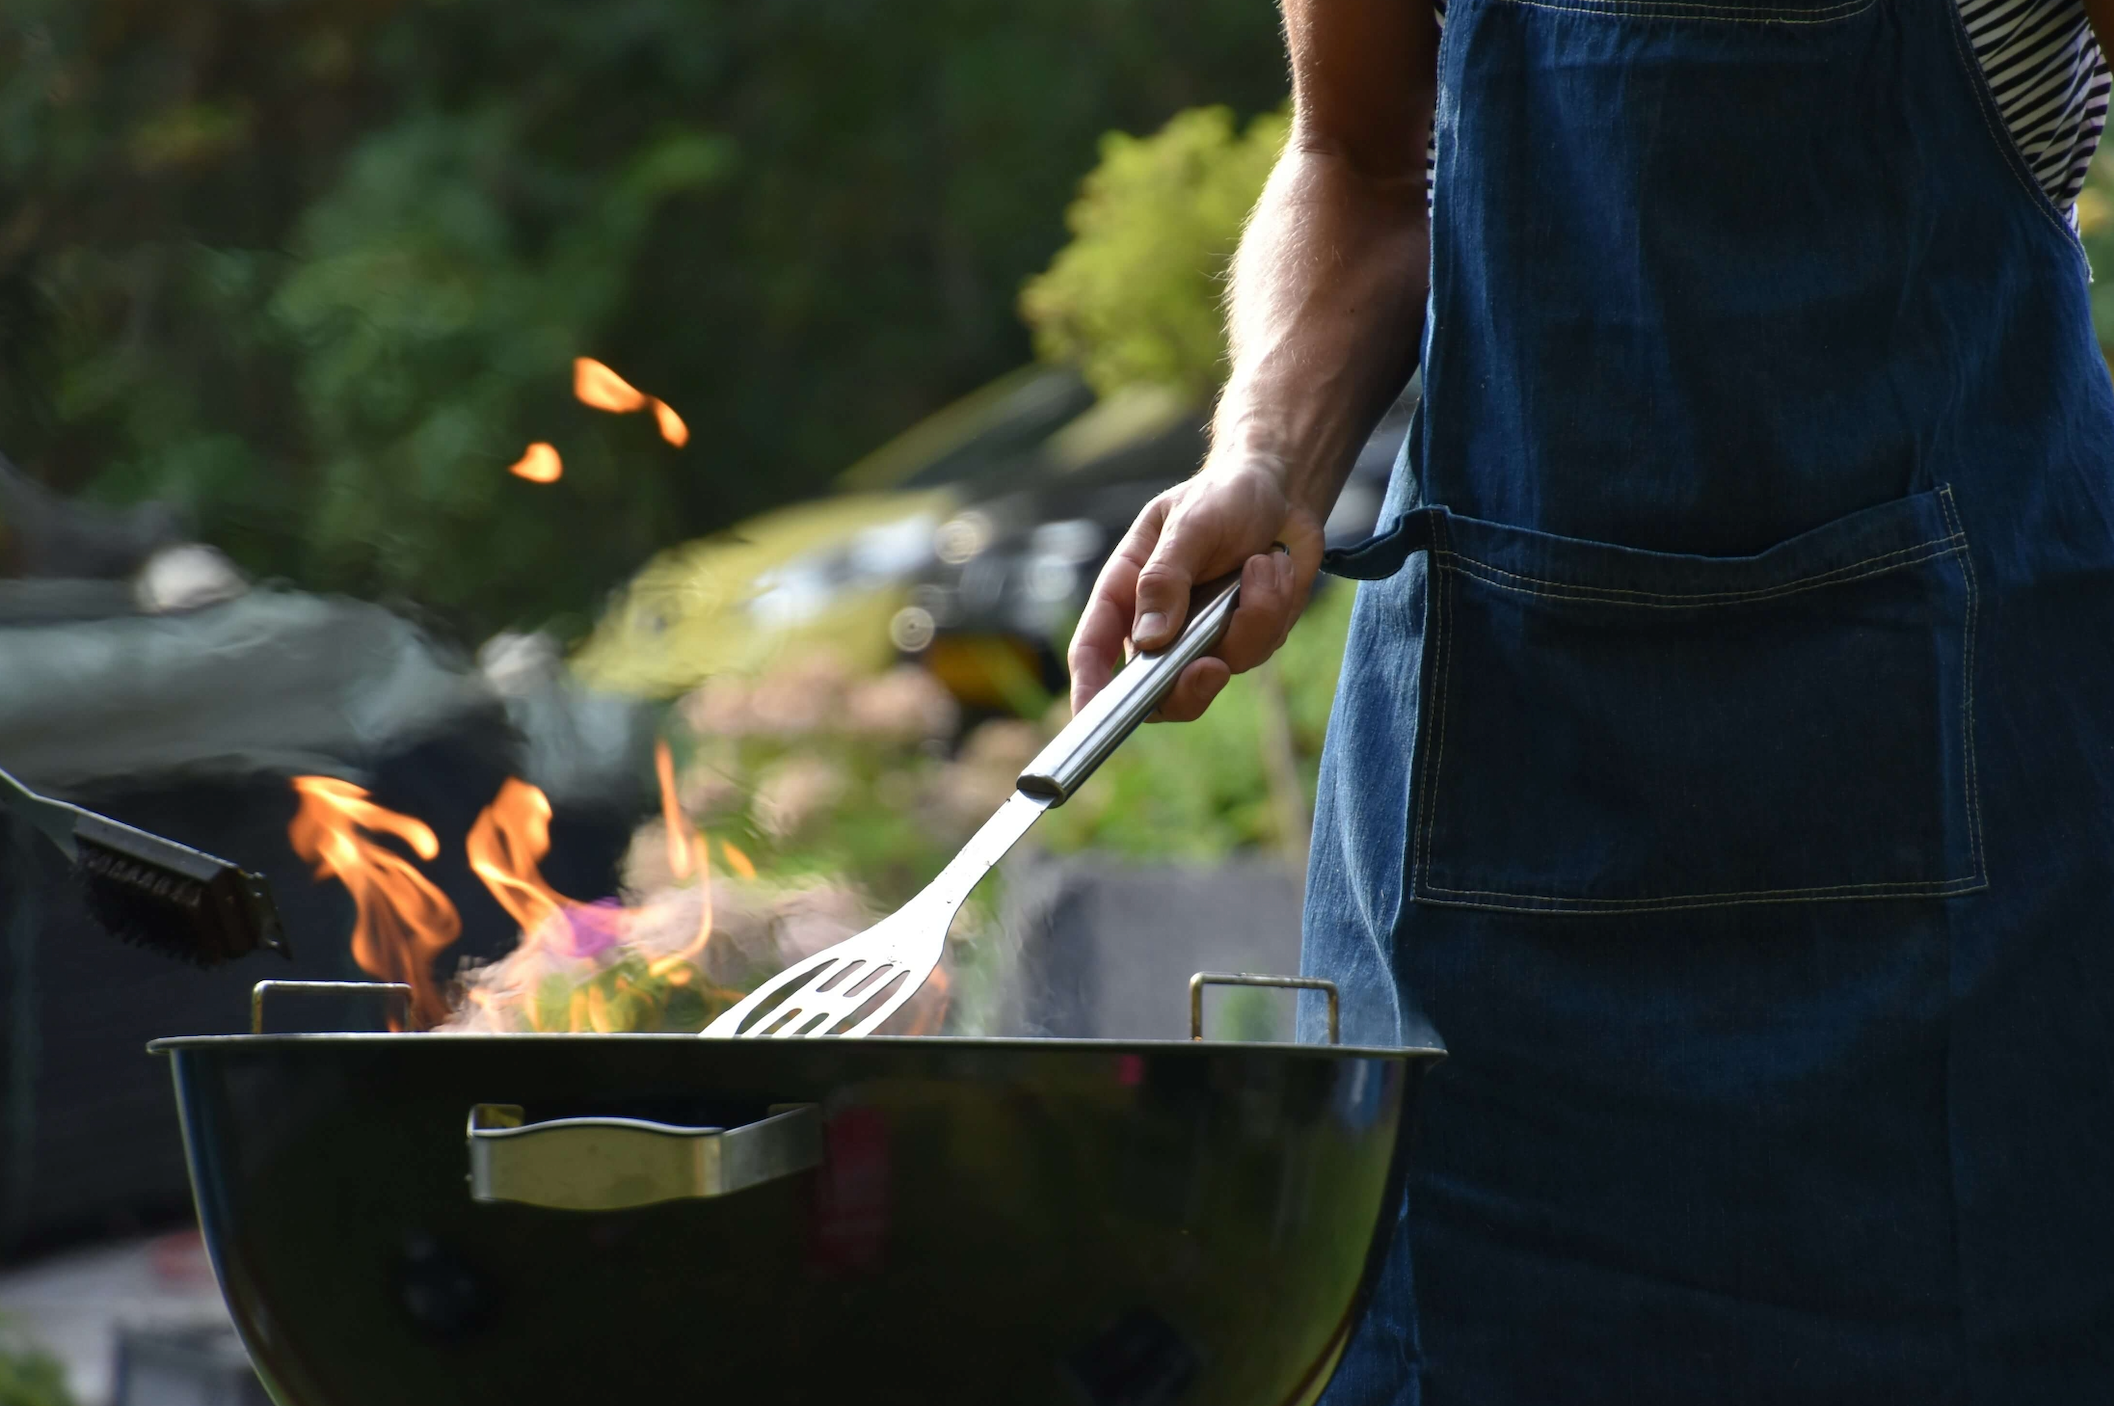 7 Tips for Hosting a Healthy & Sustainable BBQ This Season